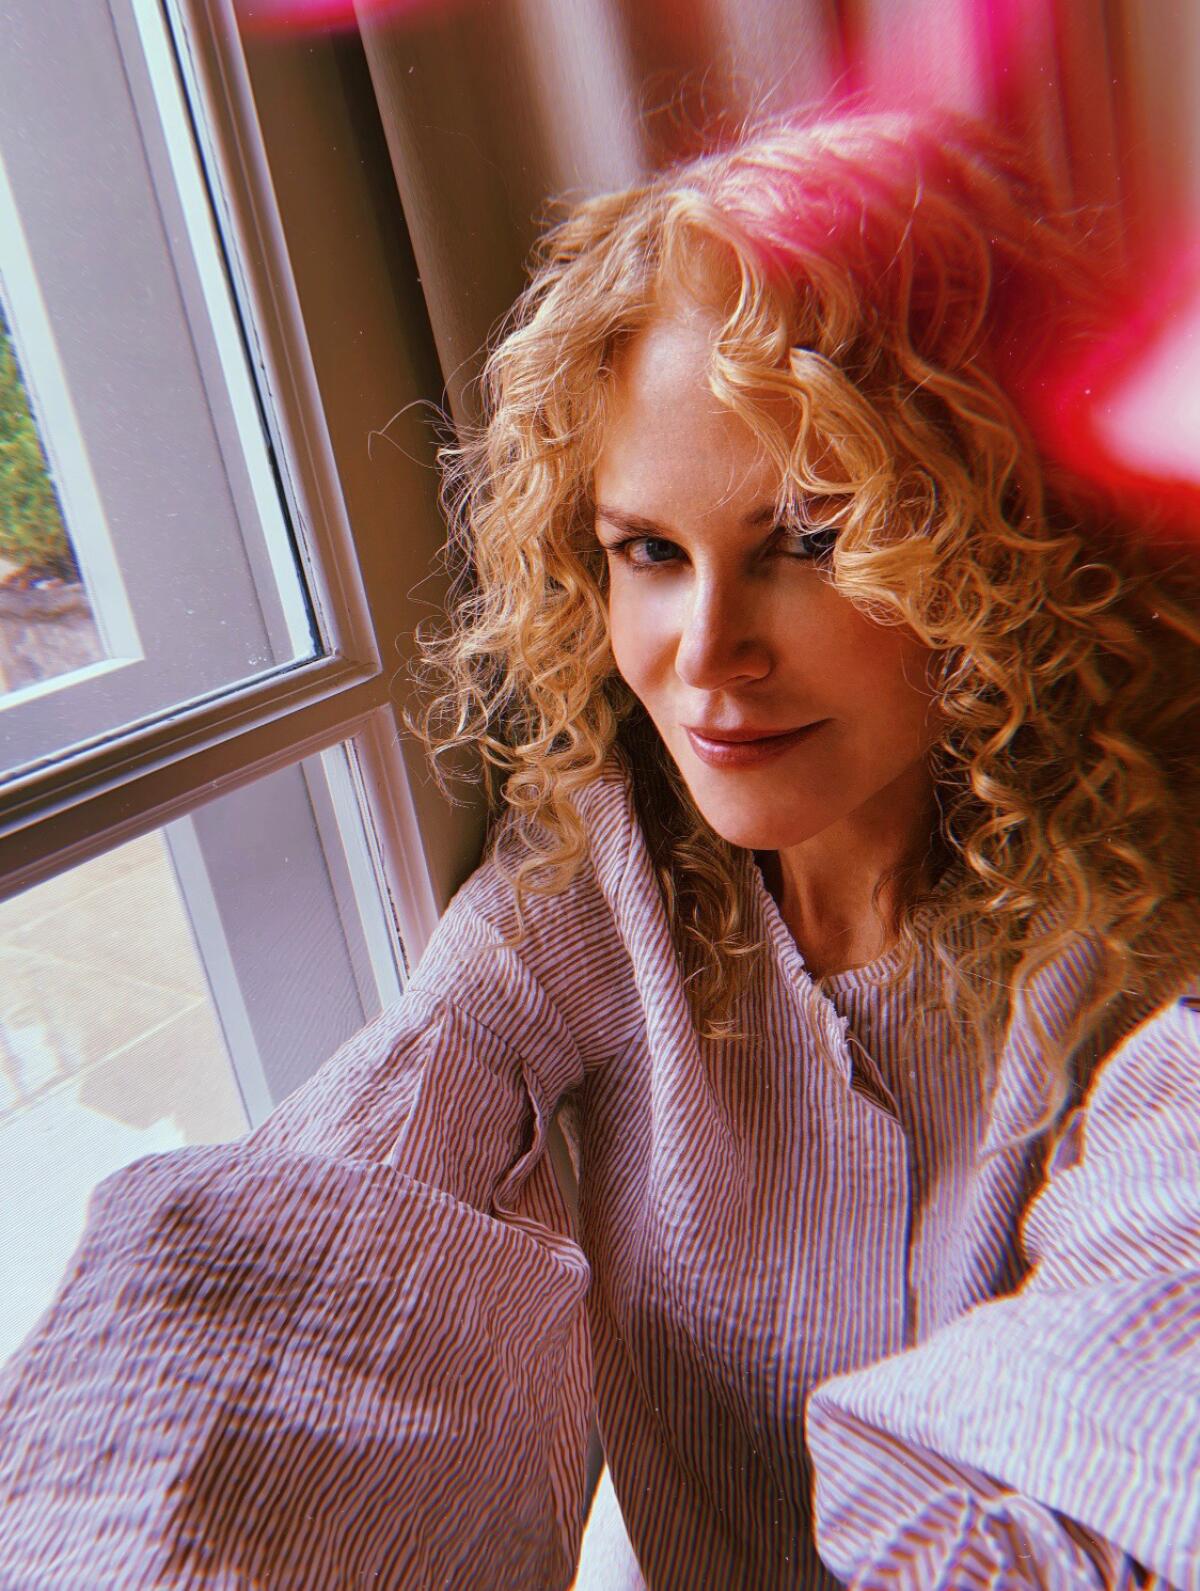 A woman with curly hair sits at a window